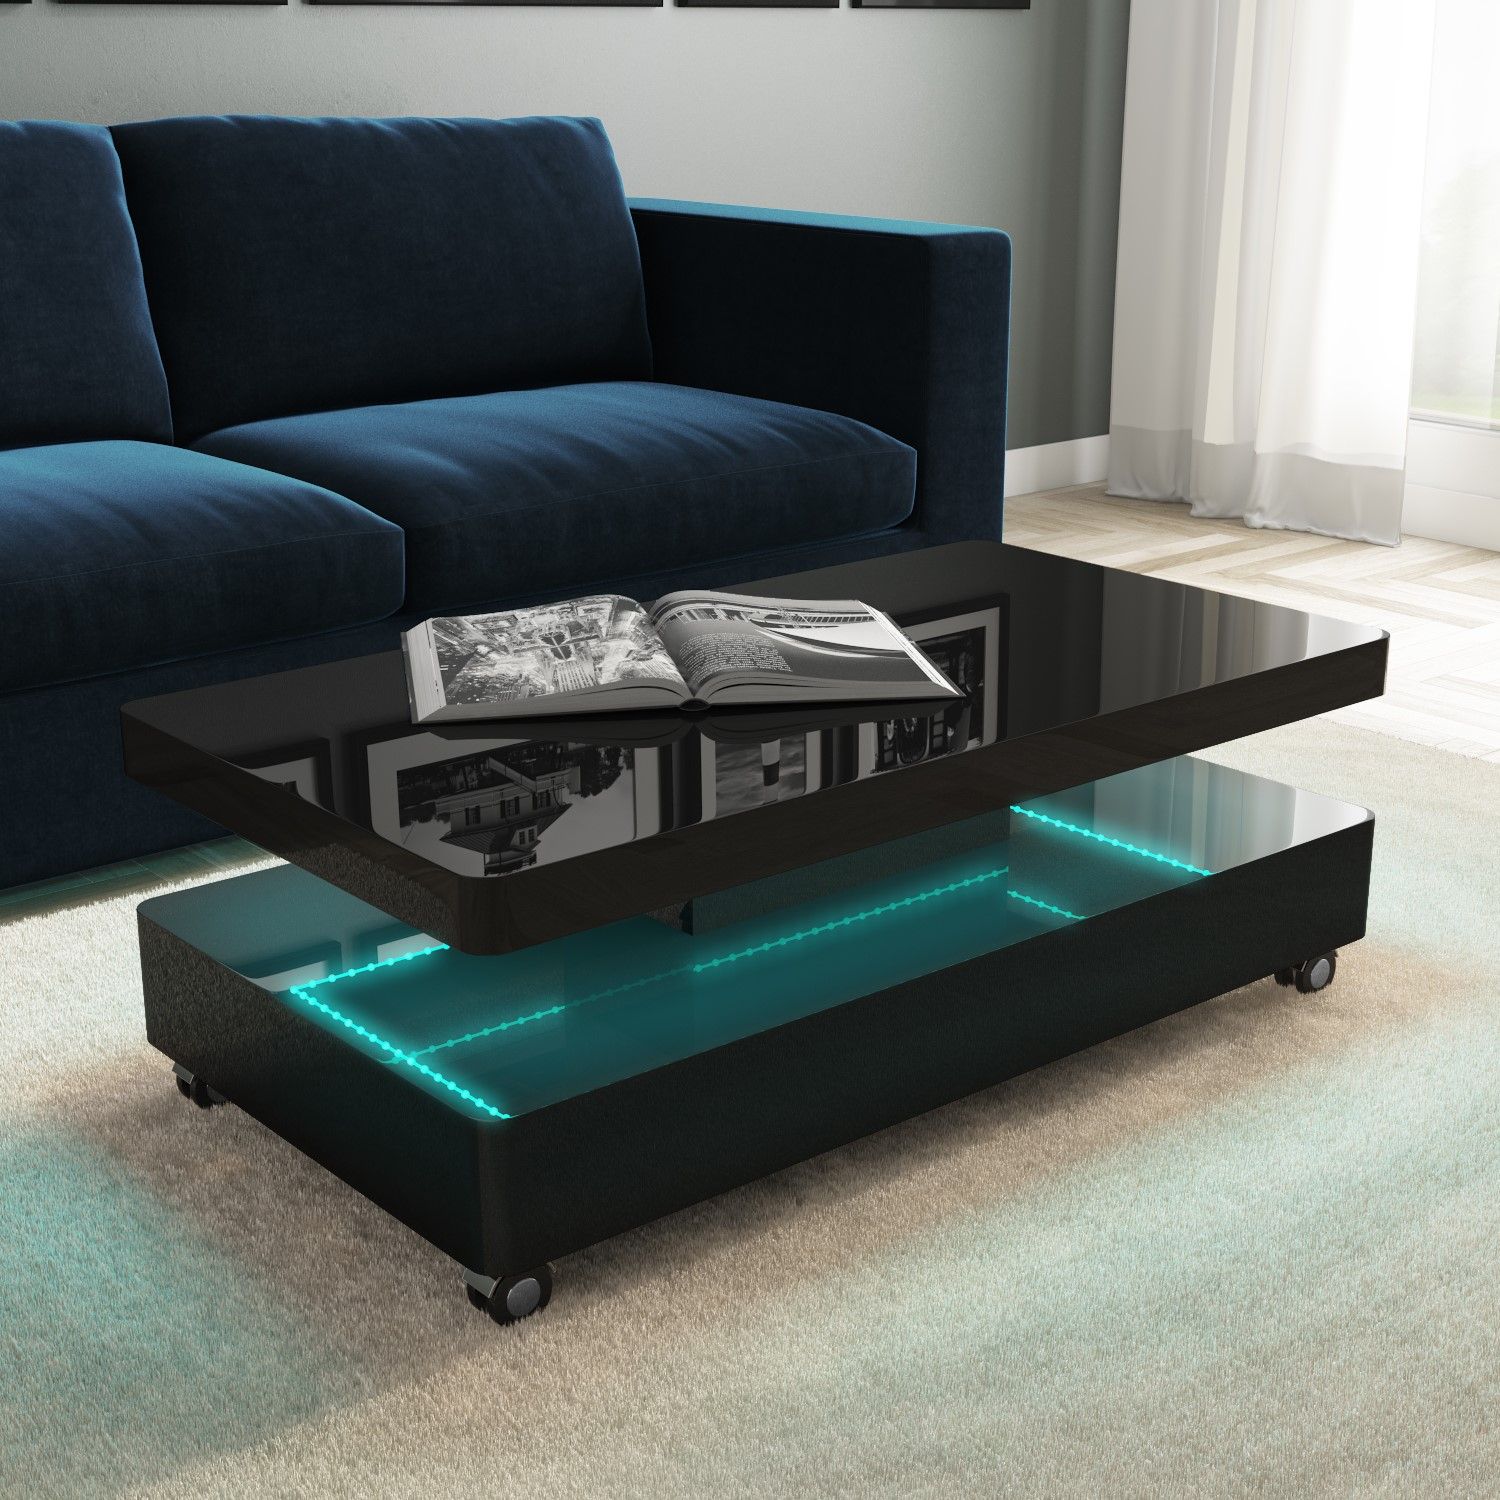 Tiffany Black High Gloss Rectangular Coffee Table With Led Lighting With Coffee Tables With Led Lights (View 12 of 15)